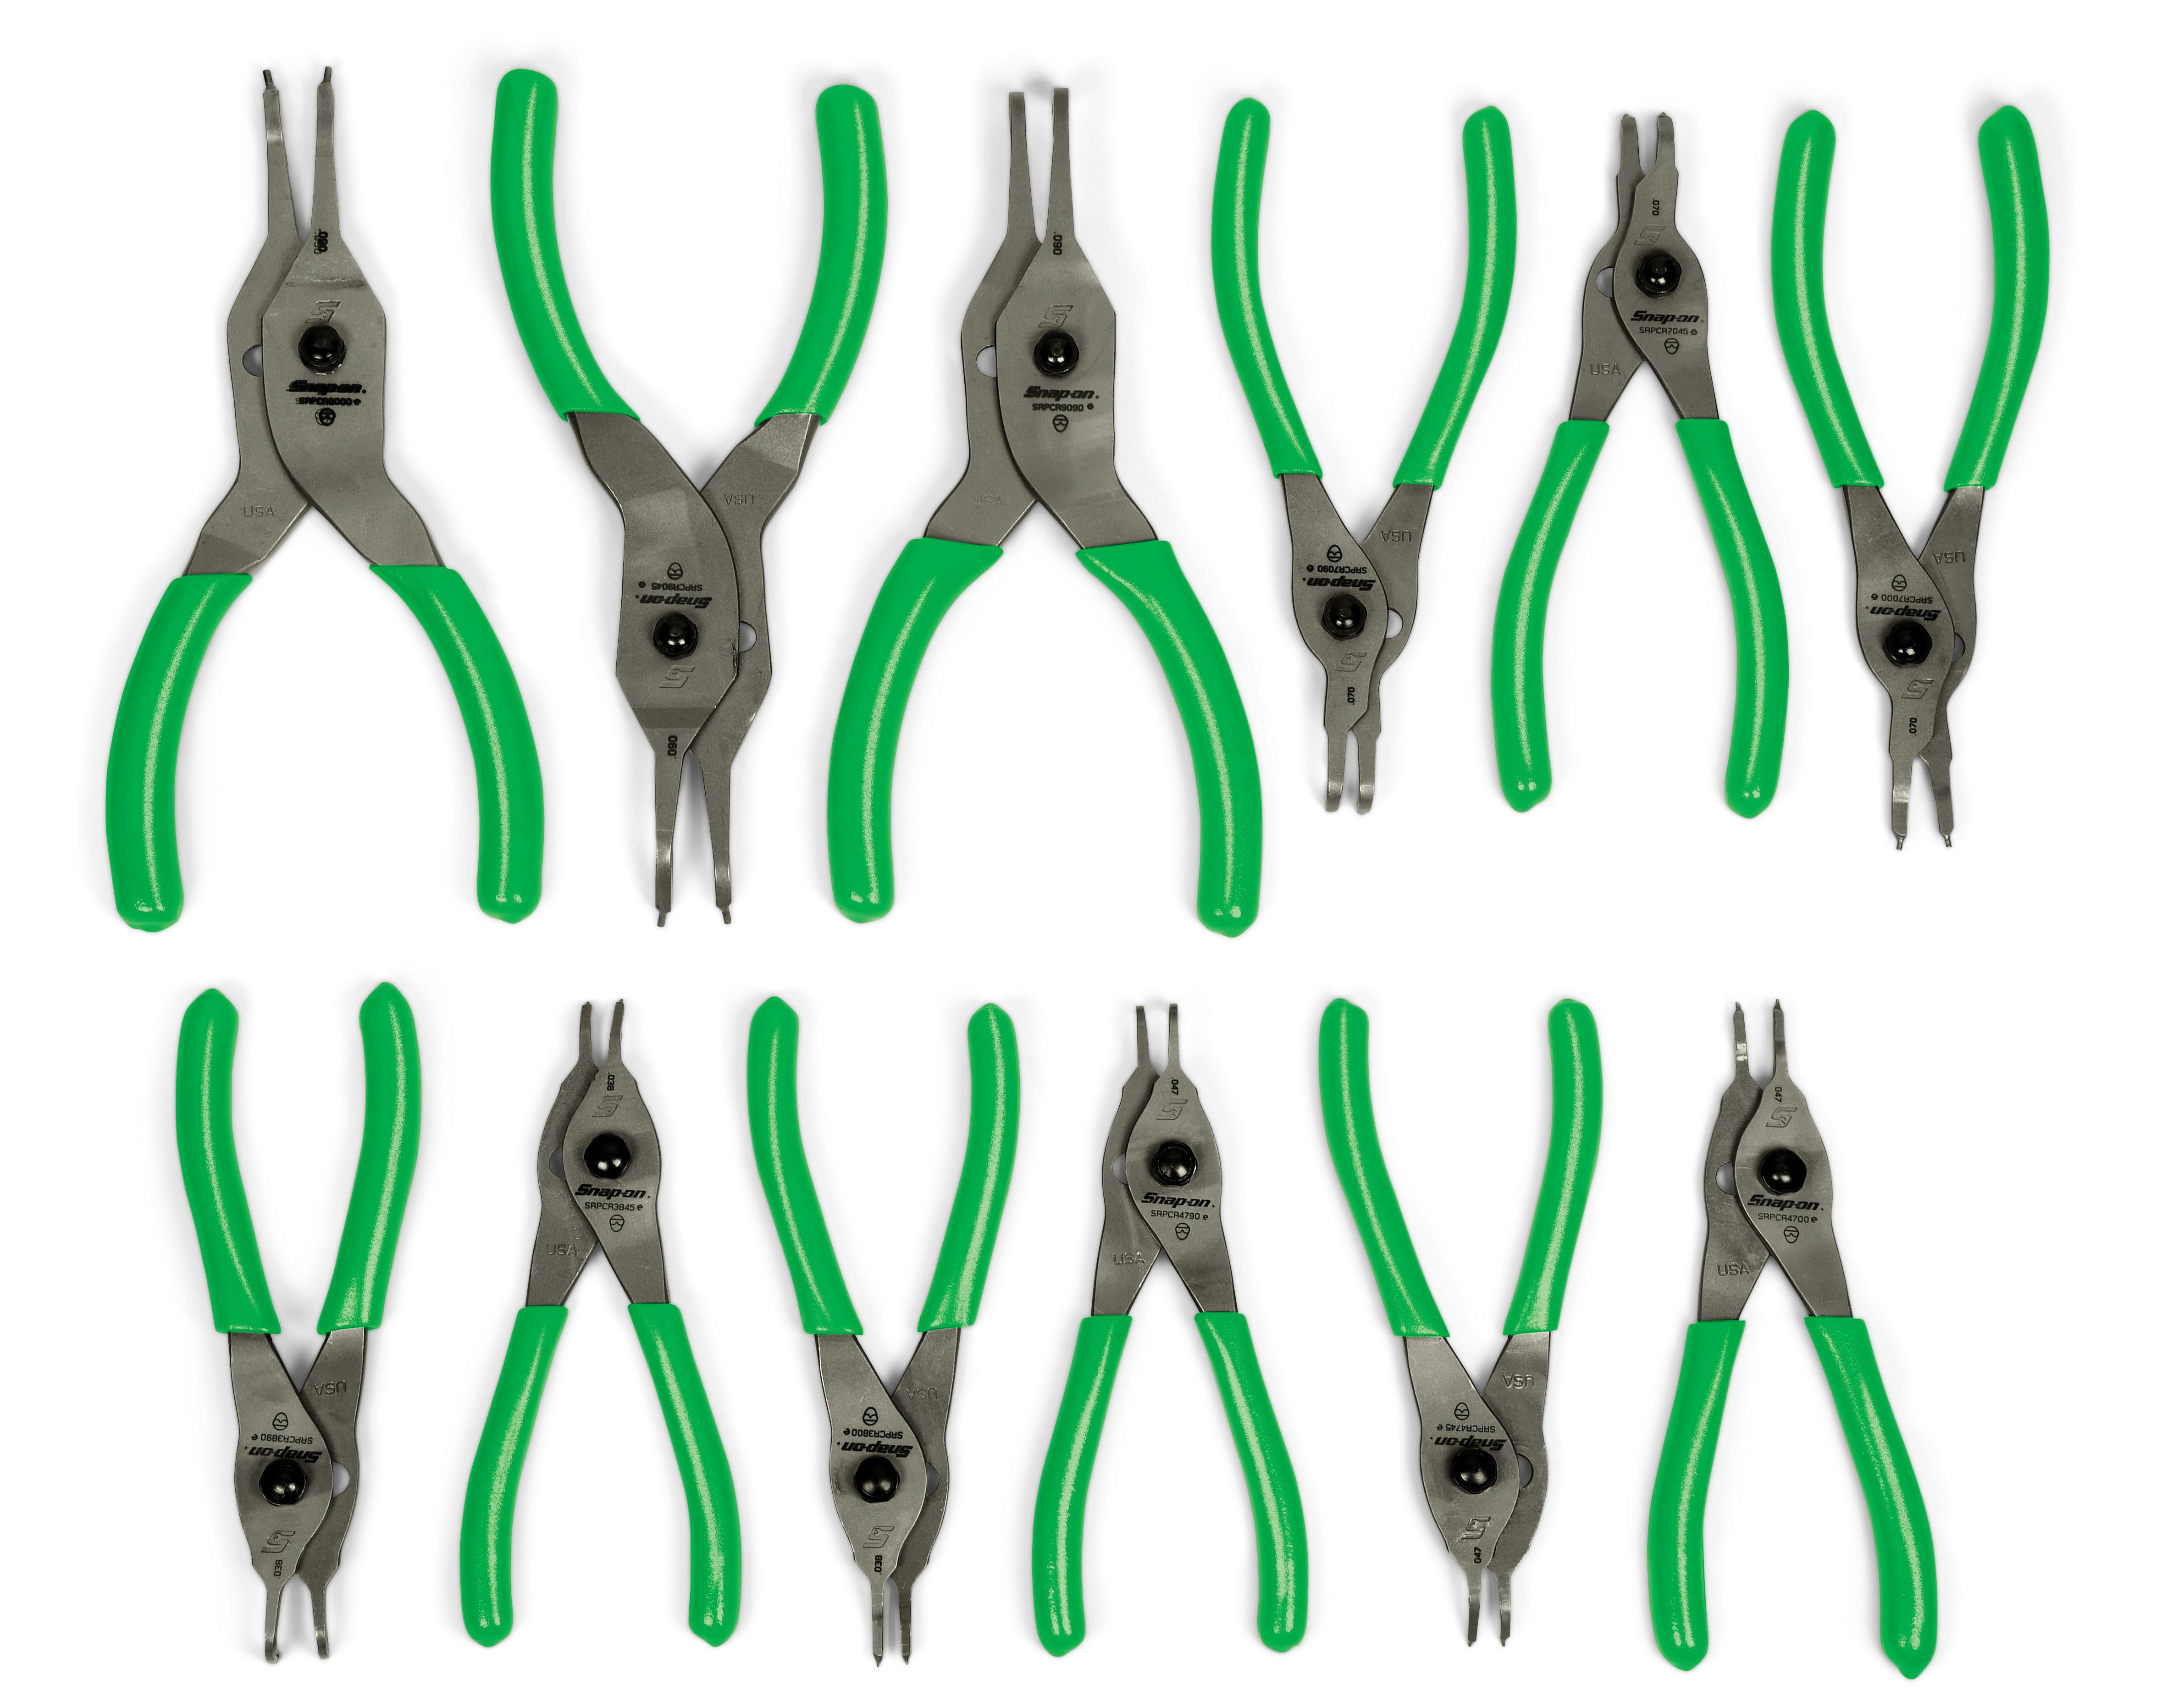 12 pc Snap Ring Pliers Set (Green), SRPCR112G